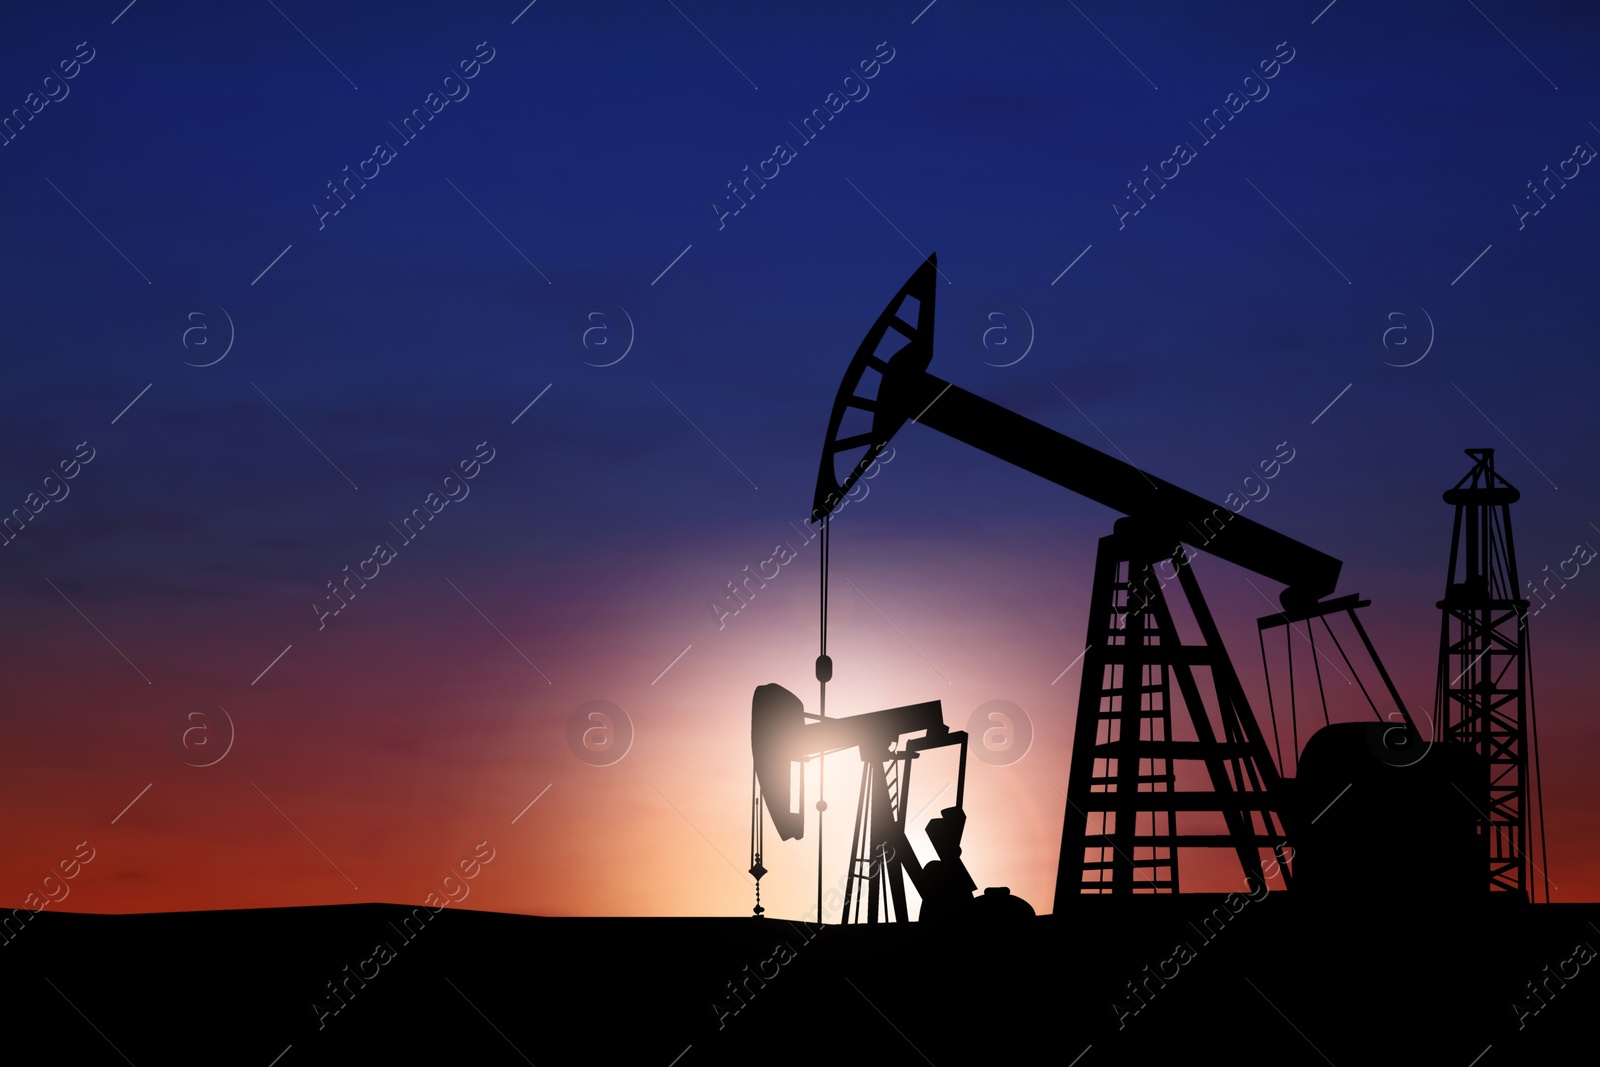 Image of Silhouettes of crude oil pumps at sunset. Space for text